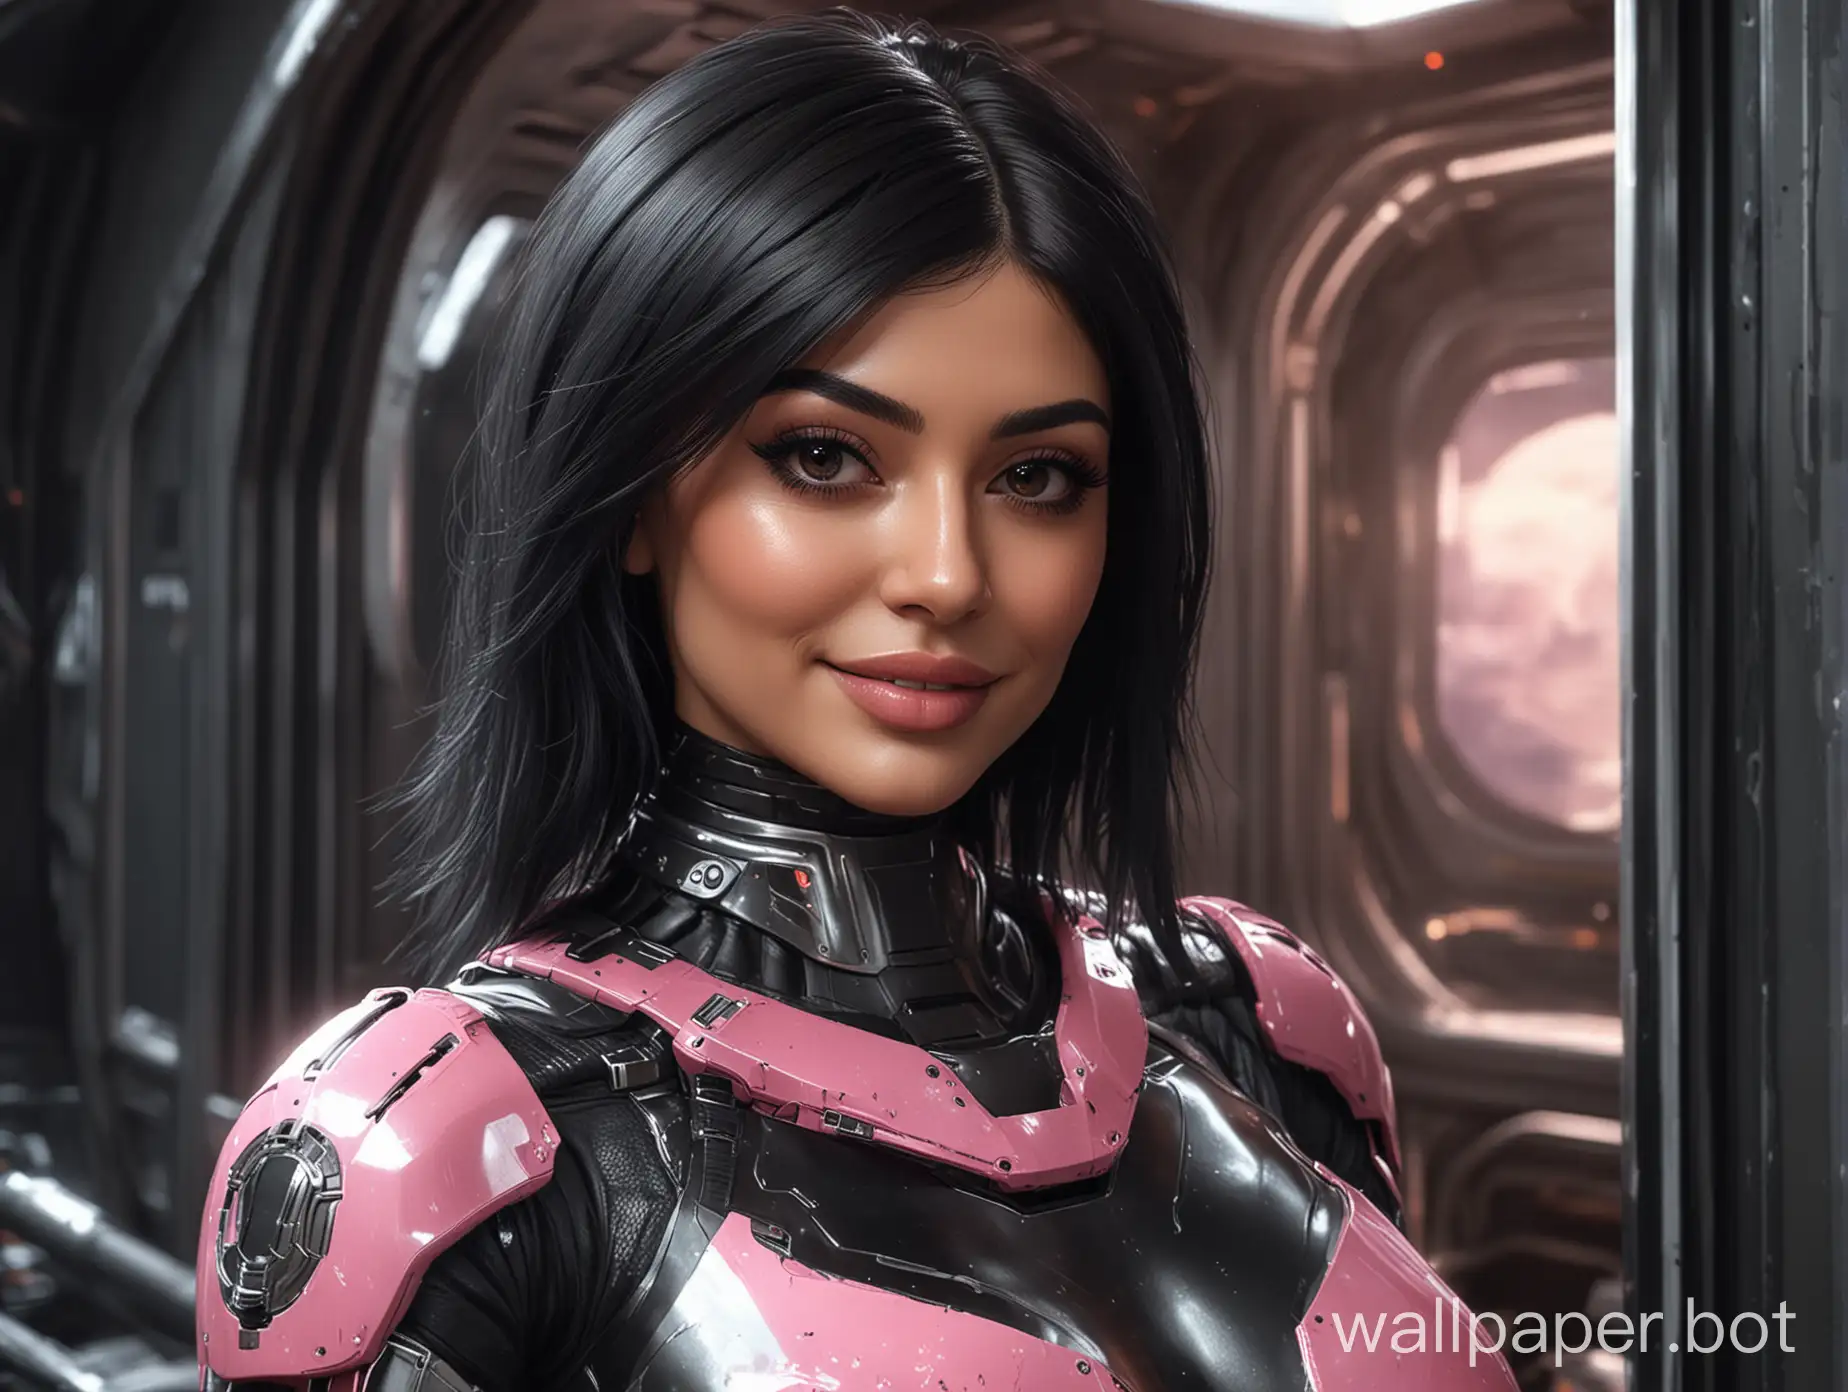 Star Citizen, female with Kylie Jenner face, selfie, Science-Fiction, close-up headshot, shiny cyber armor undersuit with the 3 colors Pink Black Silver, curvy female body shape, stars and planet through a window in the background, black long hair, natural black eyes, futuristic headgear, sexy smiling with showing teeth